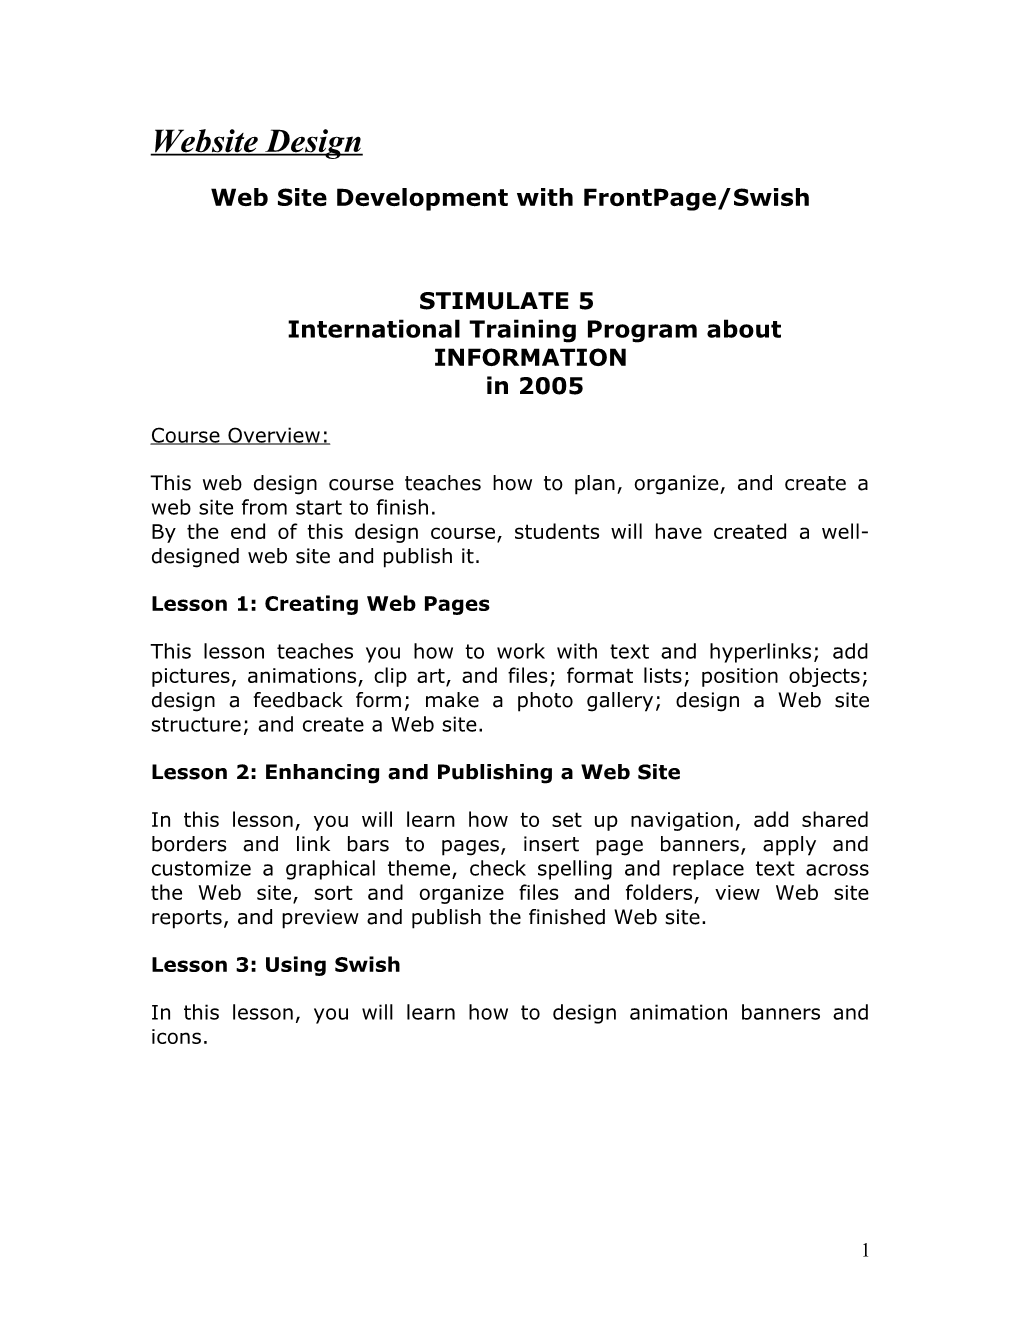 Web Site Development with Frontpage/Swish